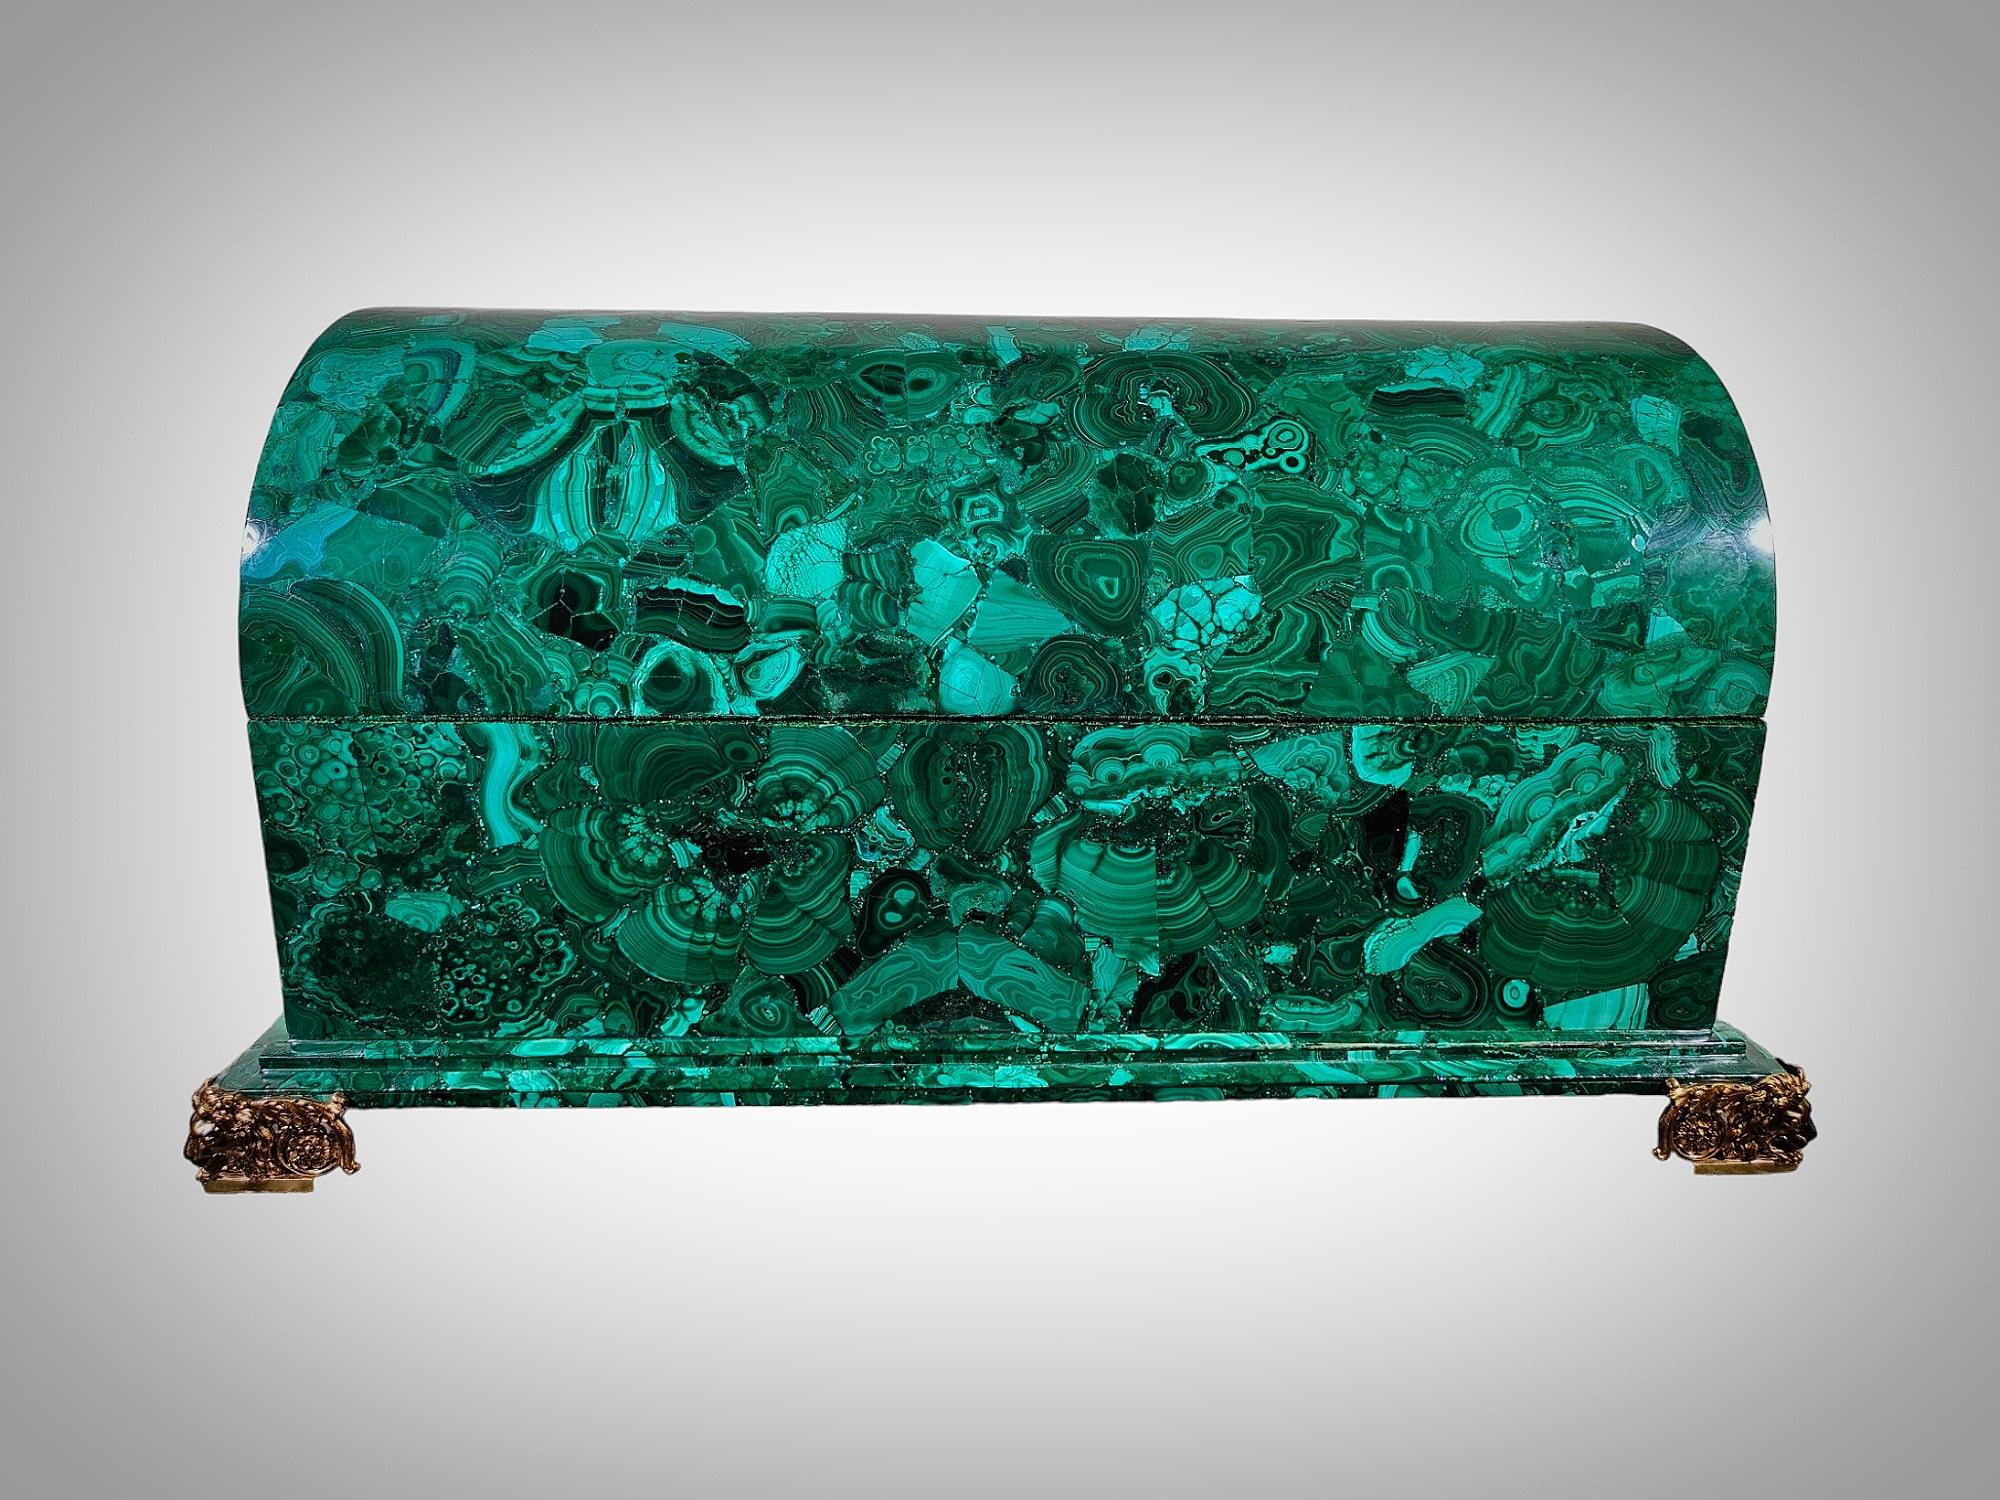 Large 20th Century Malachite Box 70 x 40 x 33 cm In Excellent Condition For Sale In Madrid, ES